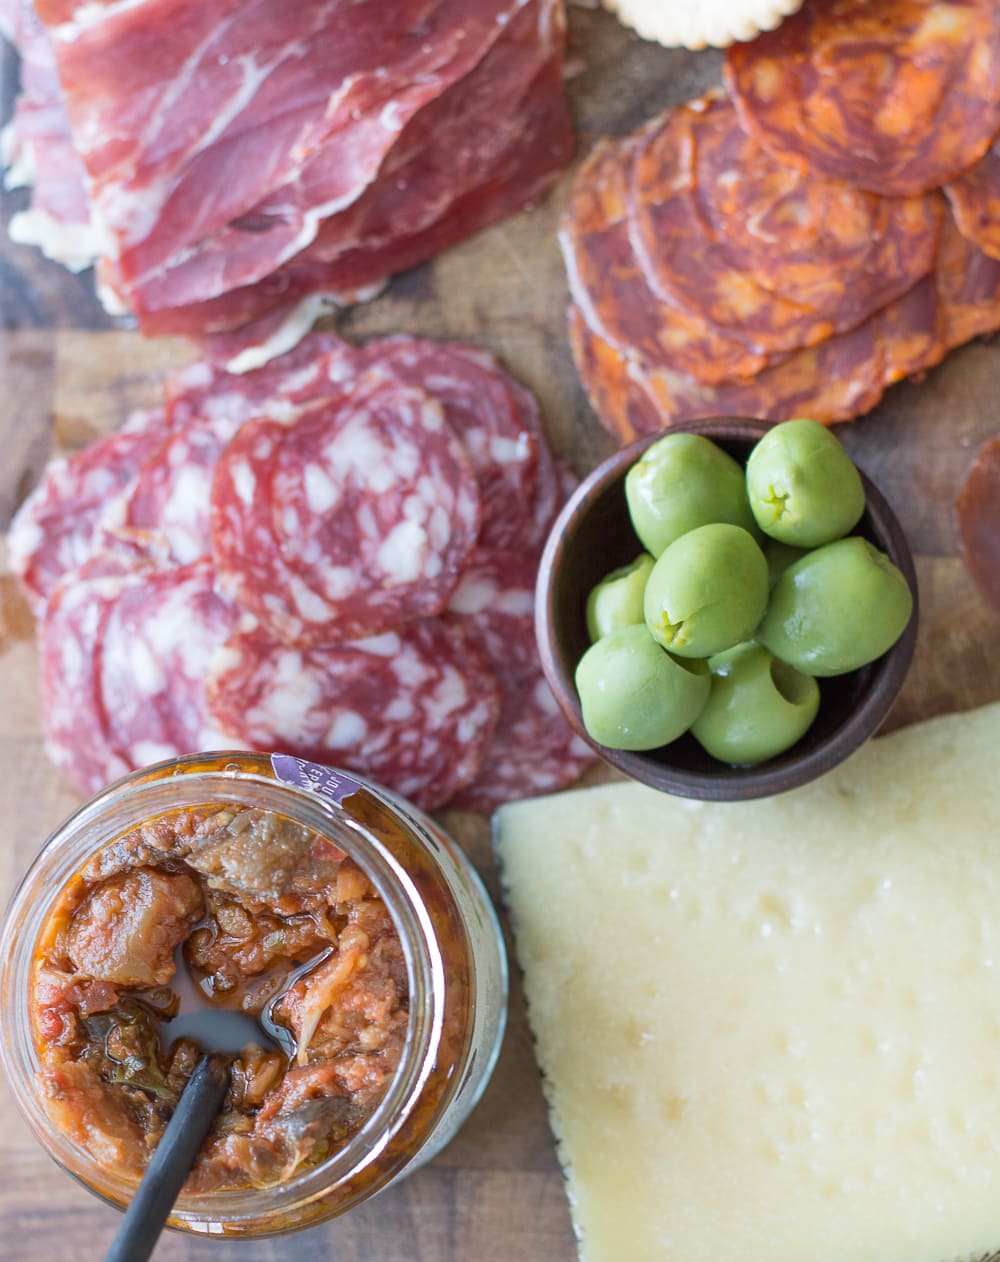 I am a sucker for a good appetizer platter. There is nothing better than a nice big Charcuterie board packed with cured meats and fancy cheeses.